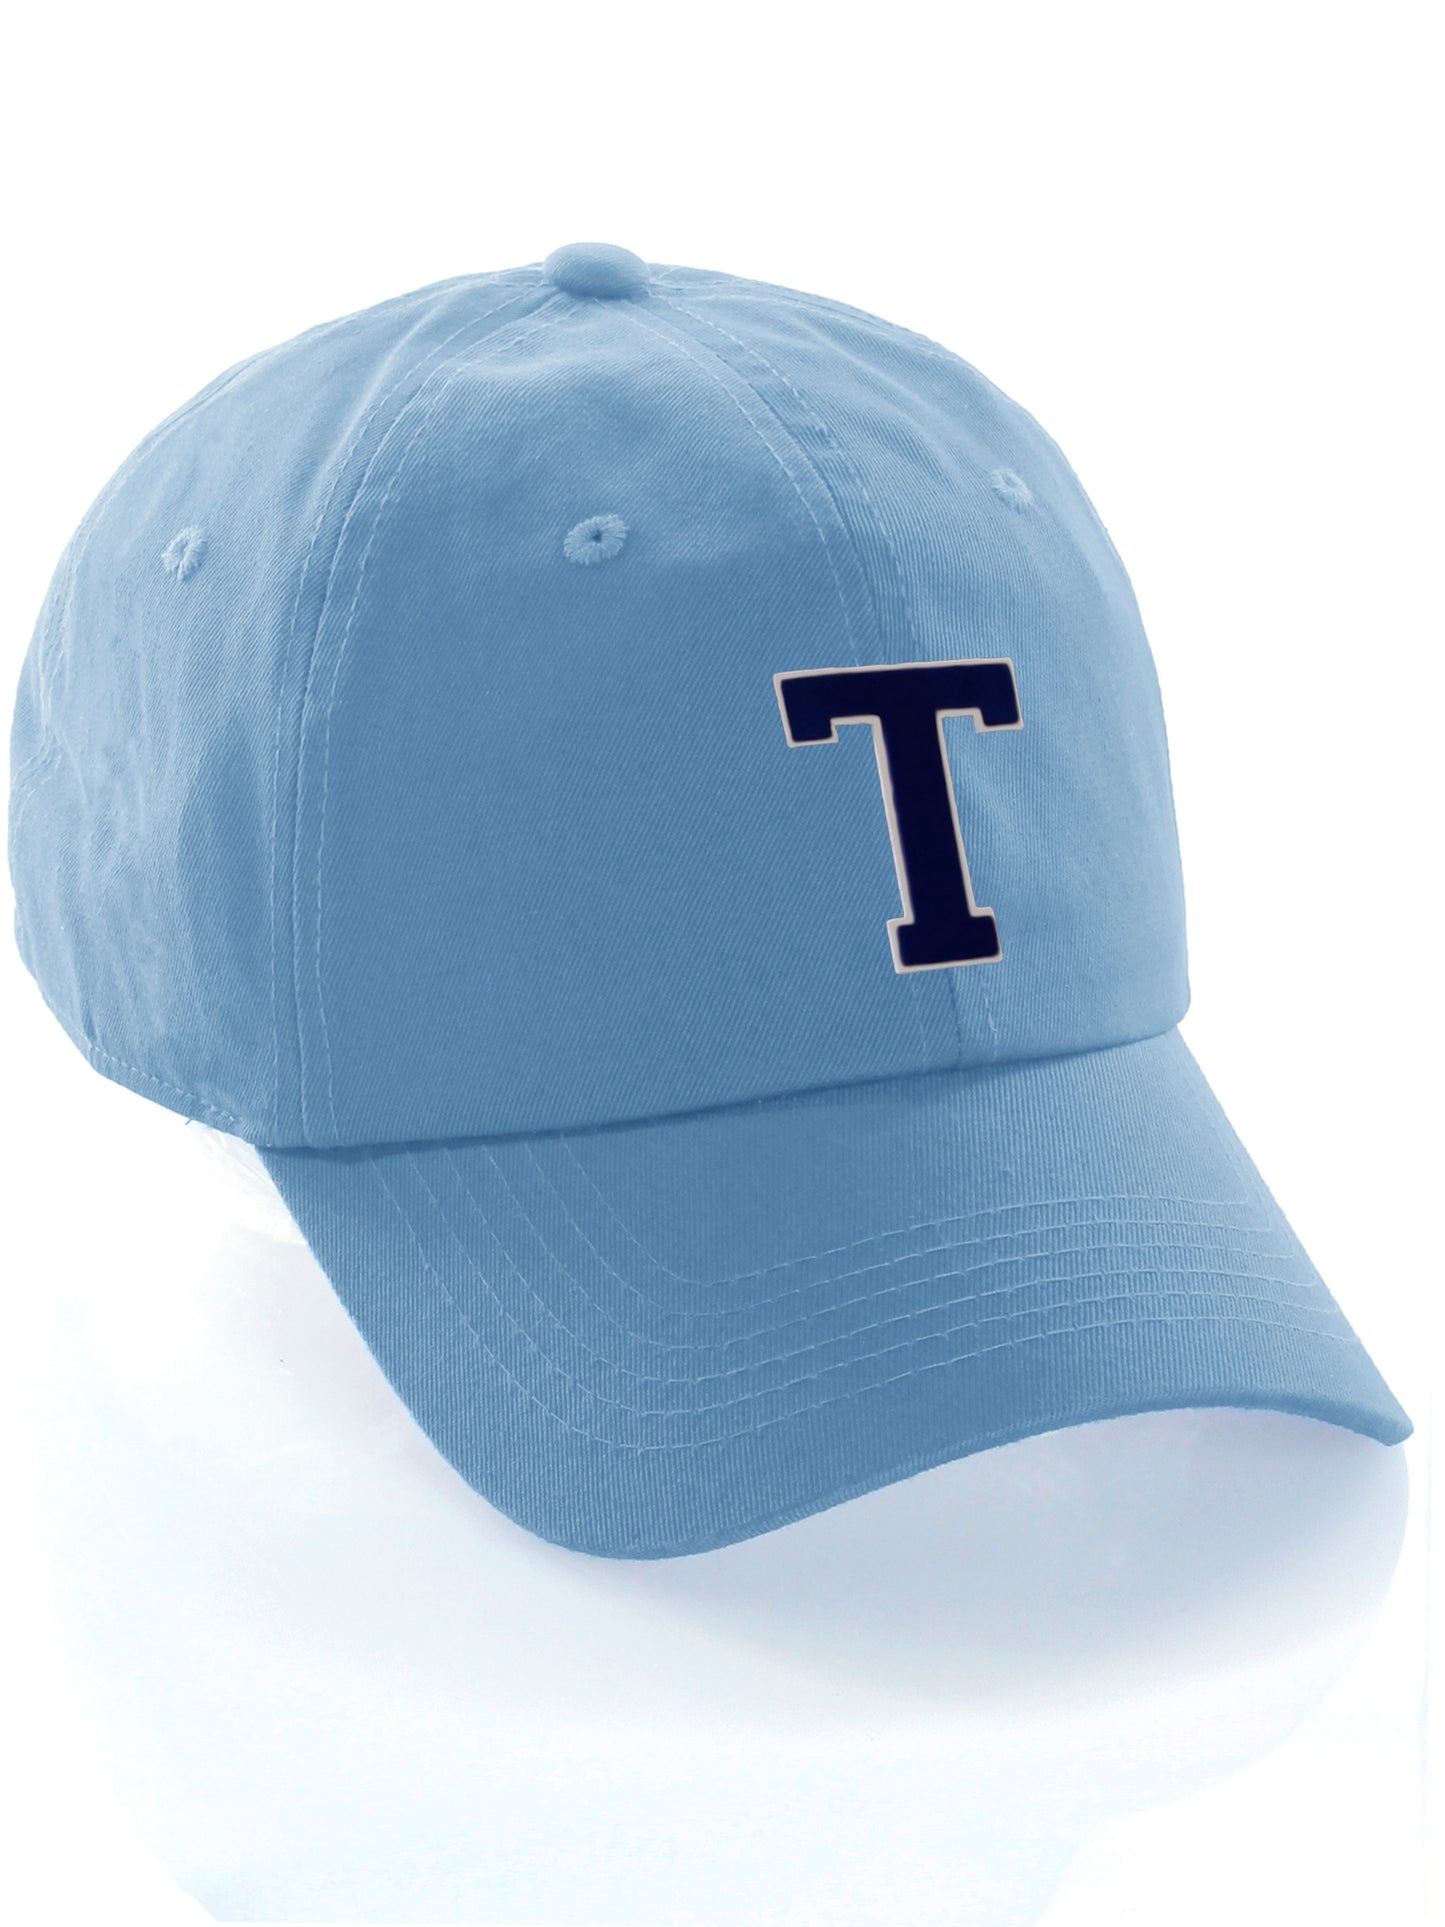 Customized Letter Initial Baseball Hat A to Z Team Colors, Sky Cap White Navy